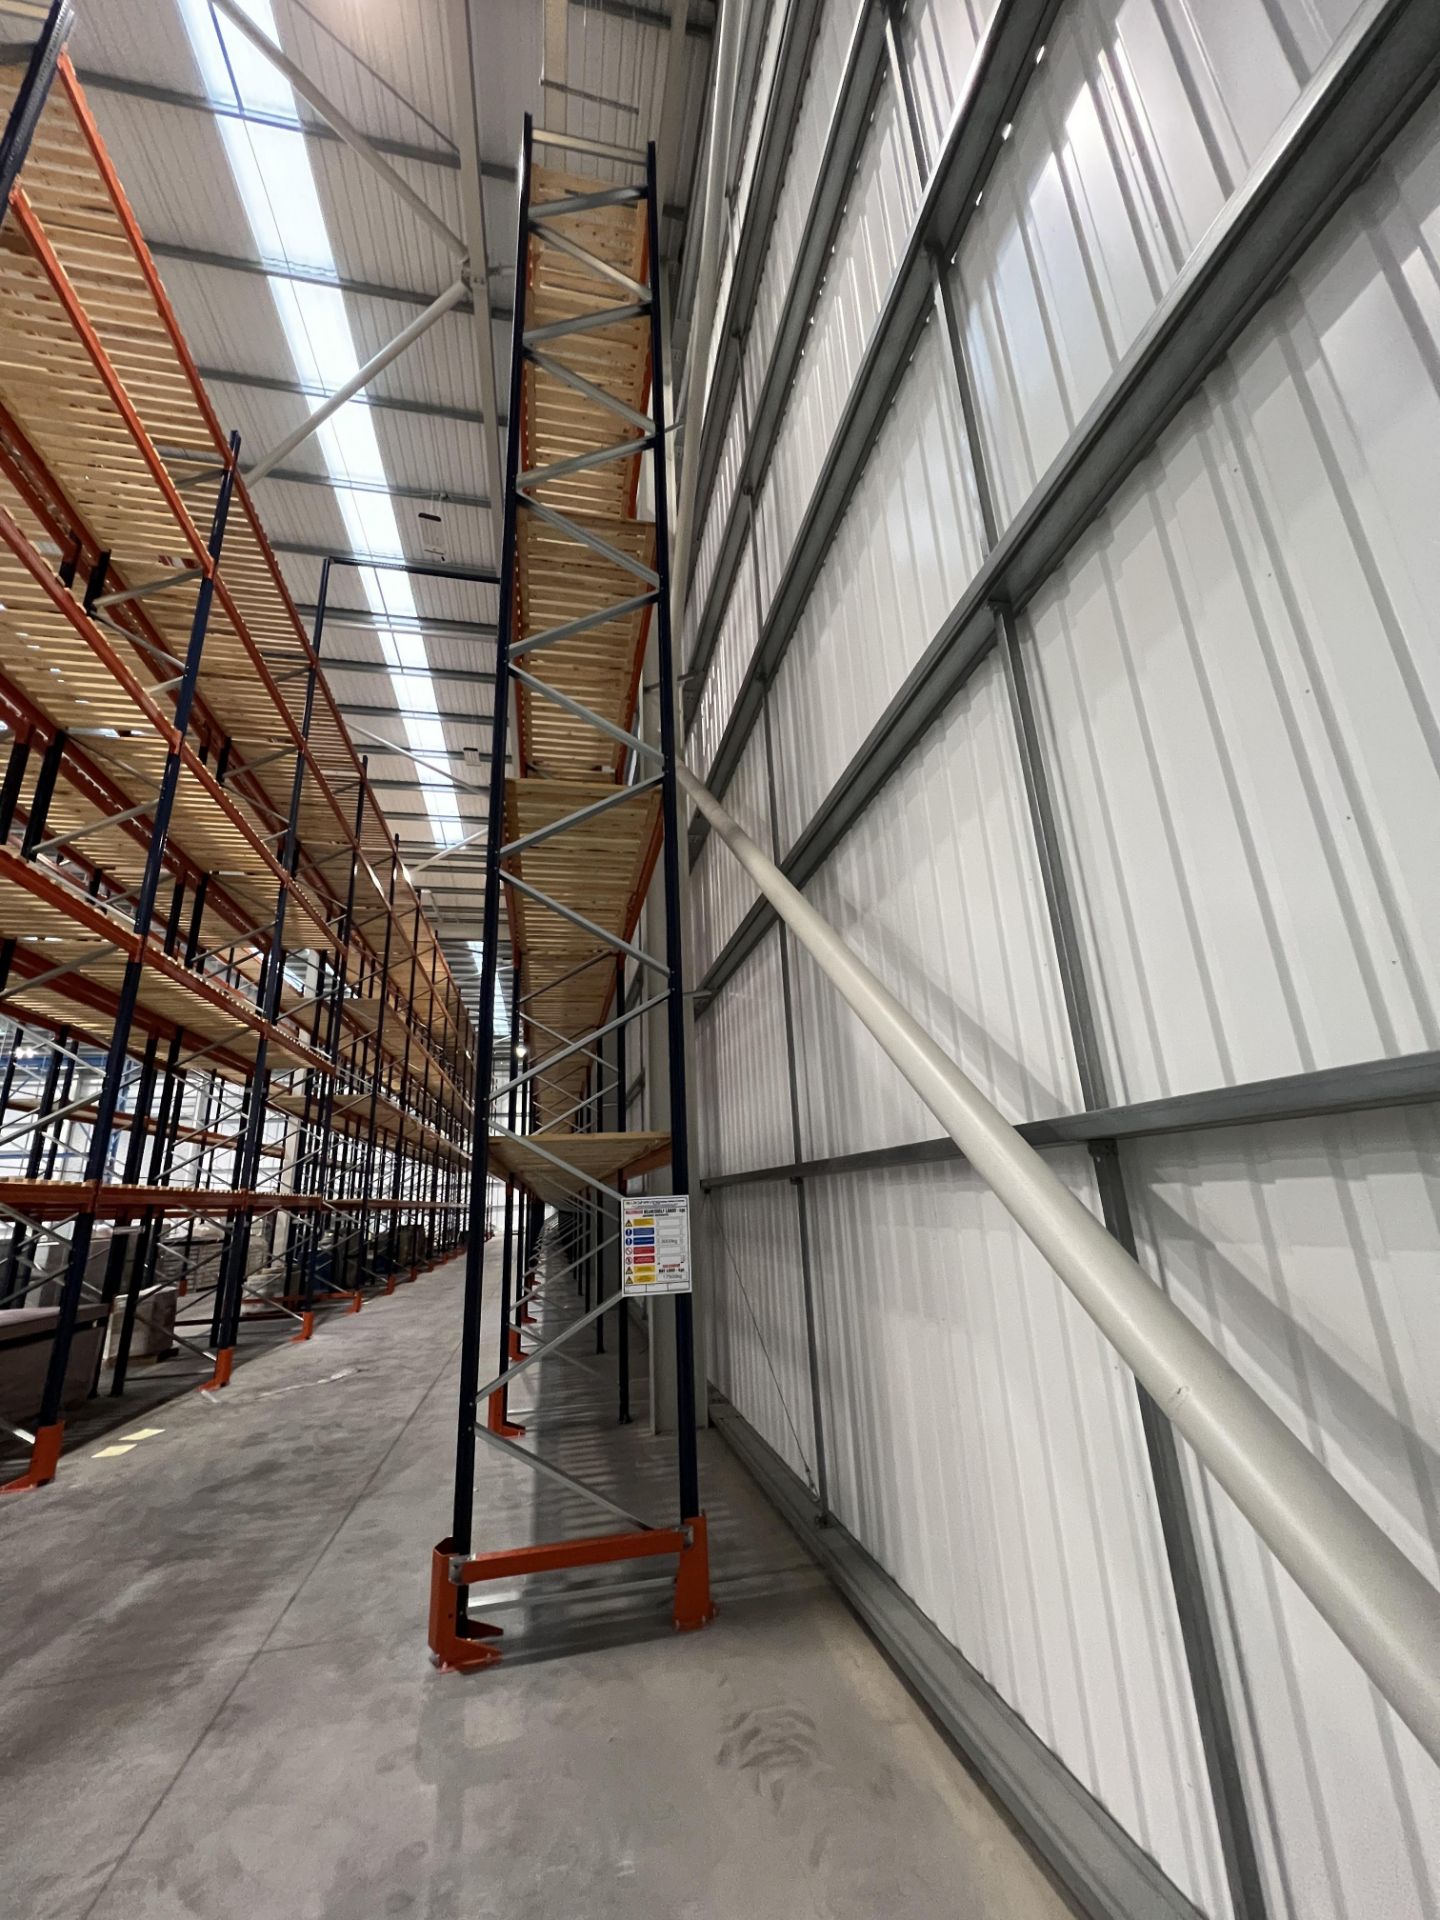 Mecalux M-22P high bay boltless pallet racking (2021), a 53 metre single run with 16 bays, to - Image 14 of 17